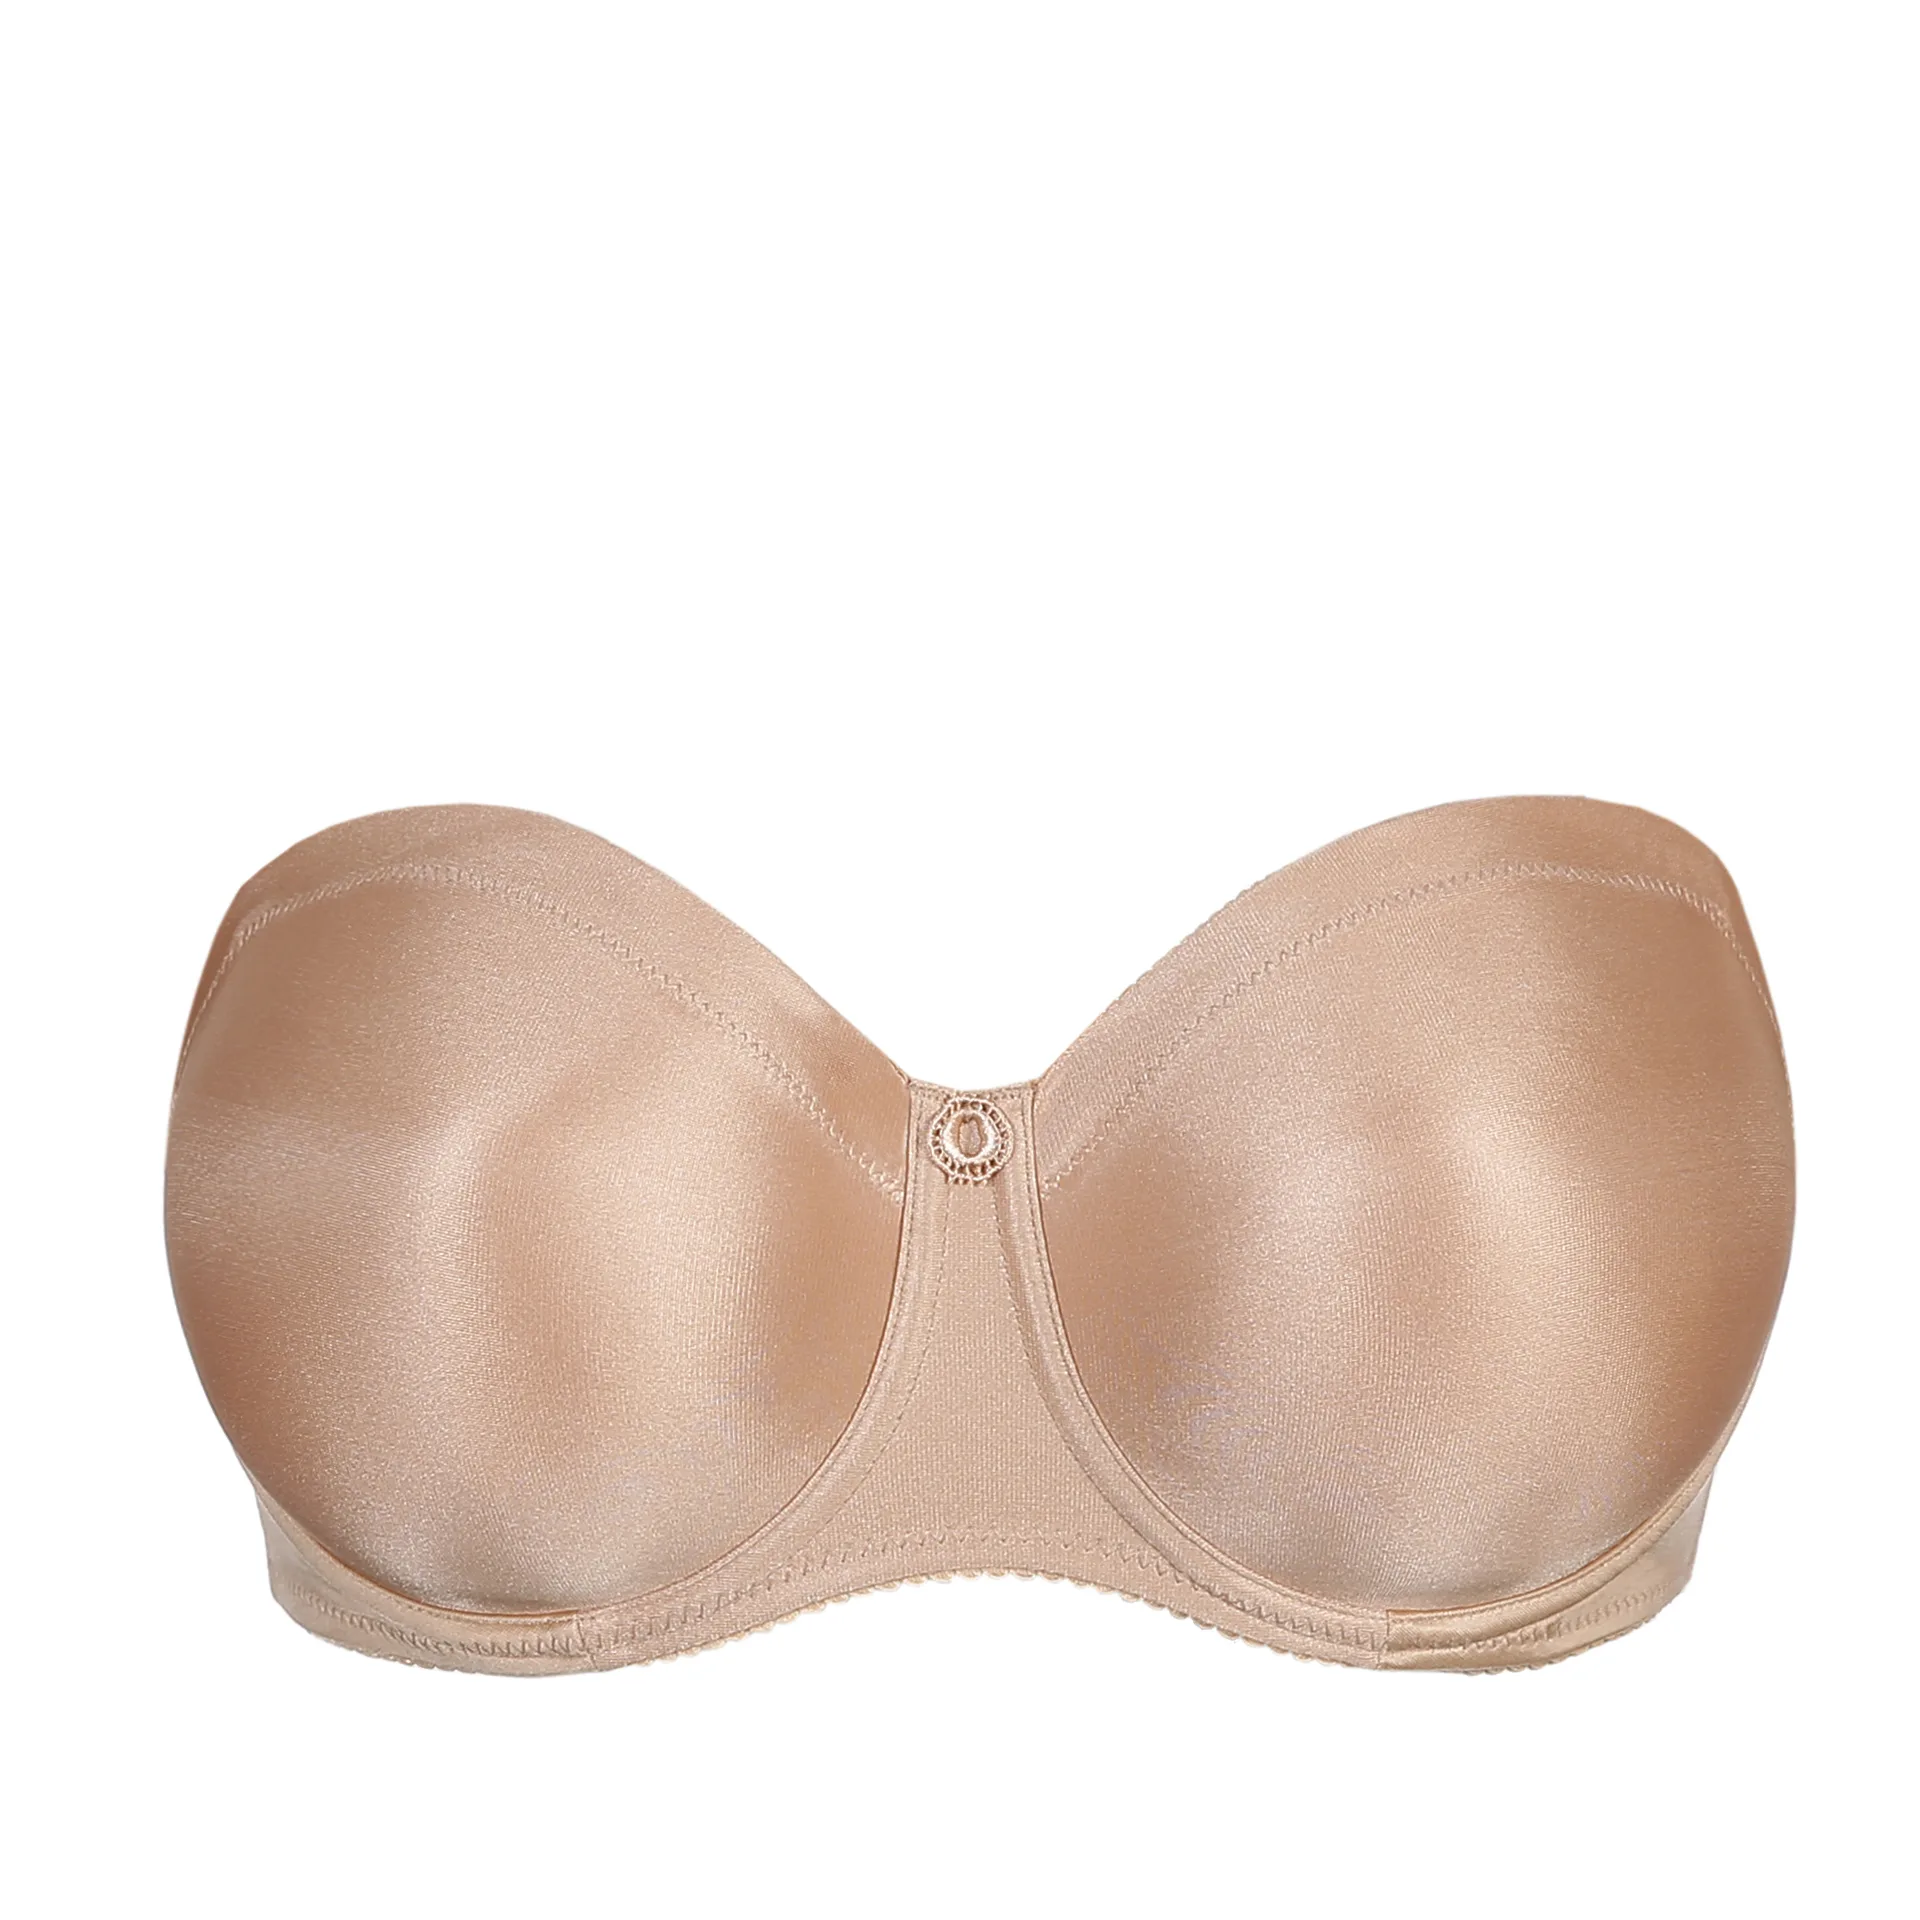 PrimaDonna EVERY WOMAN light tan strapless non padded